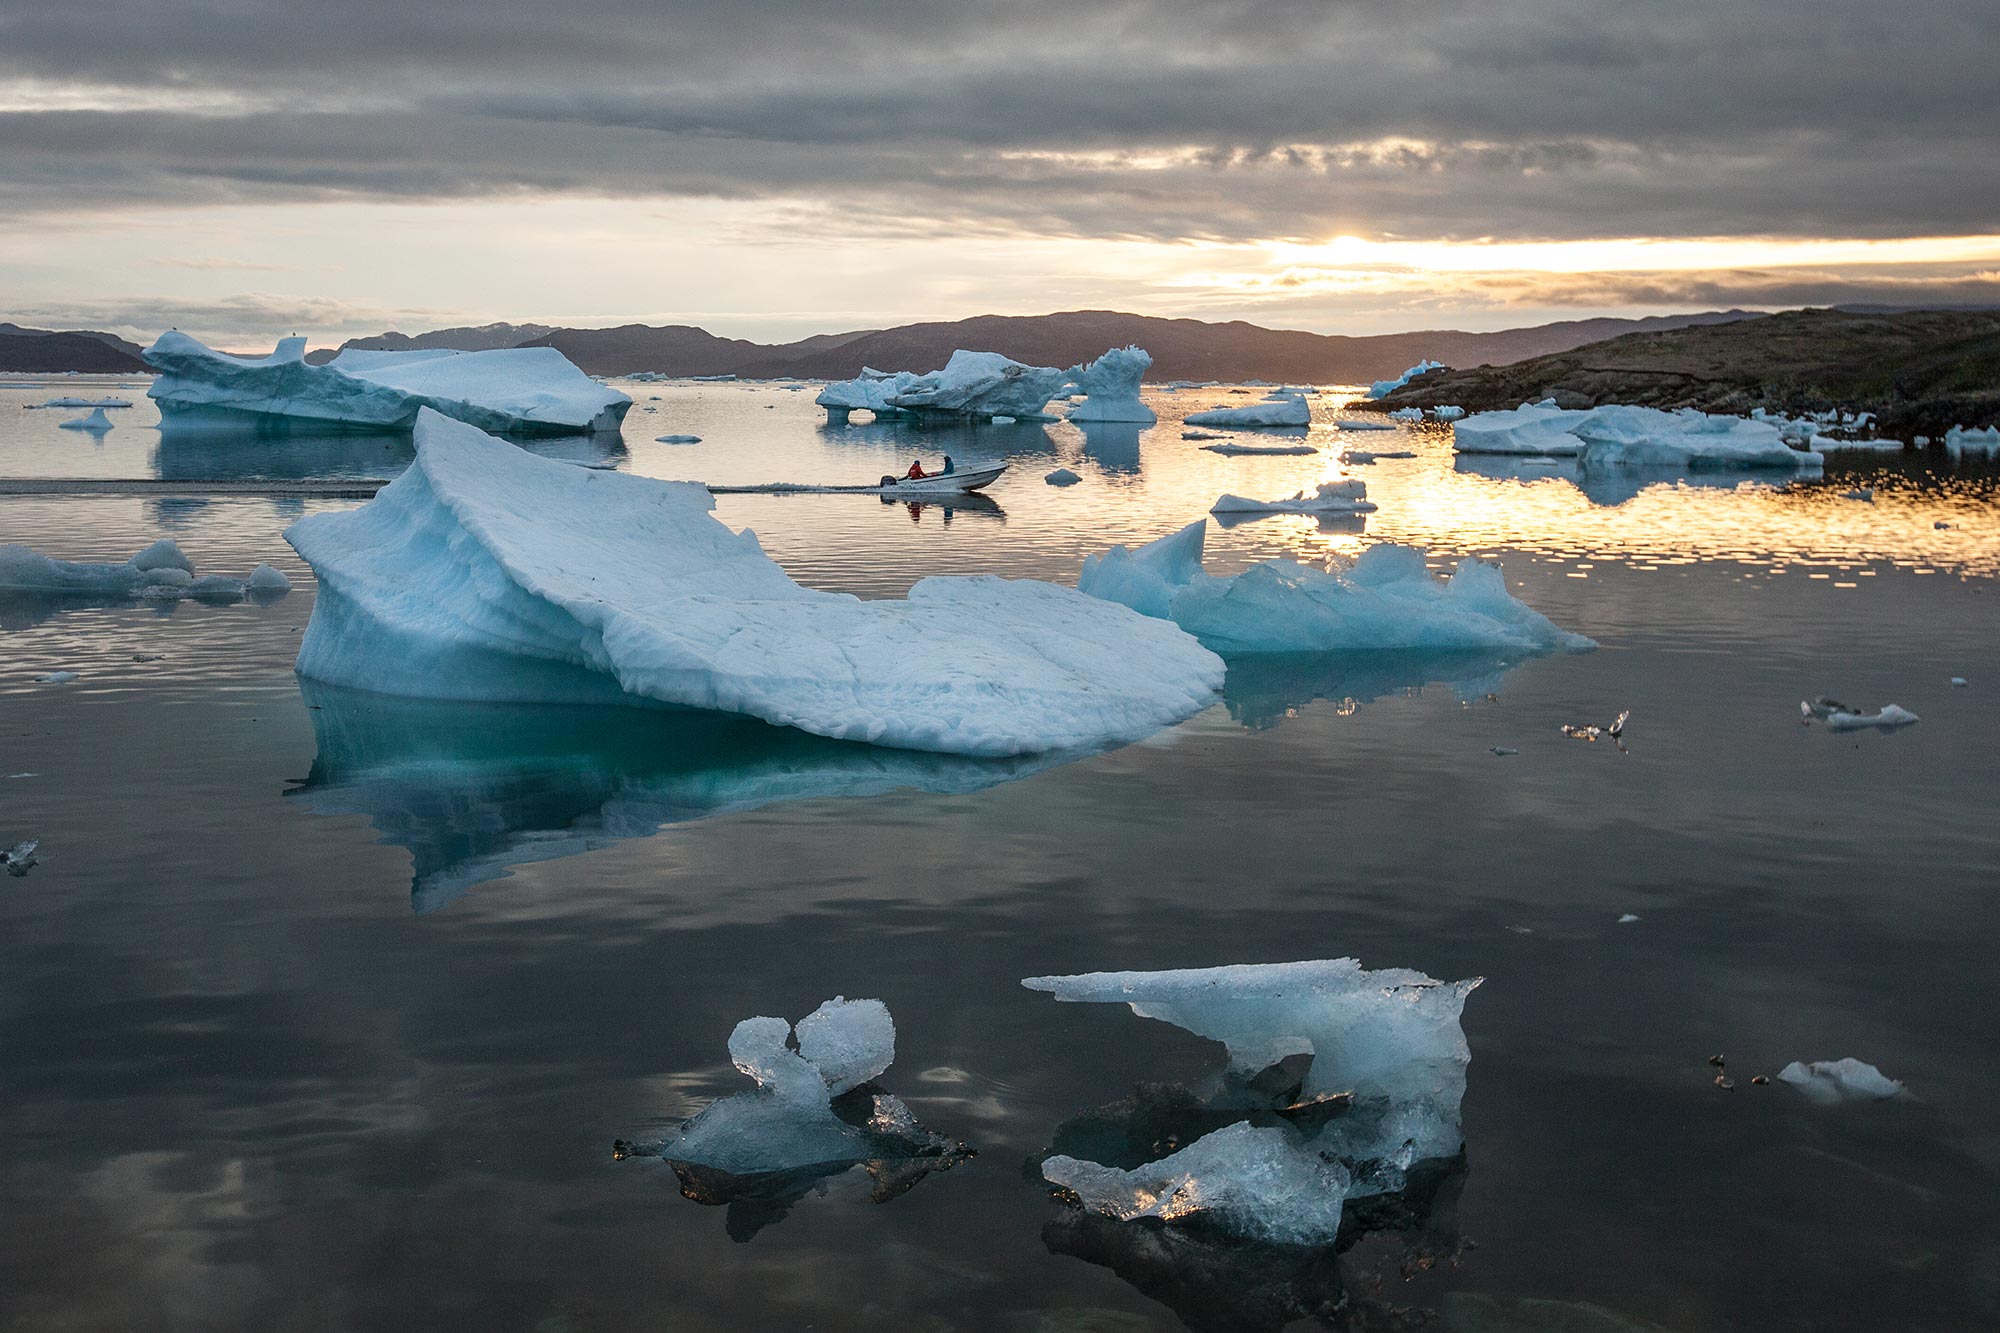 Icebergs on the beach at sunset in Greenland